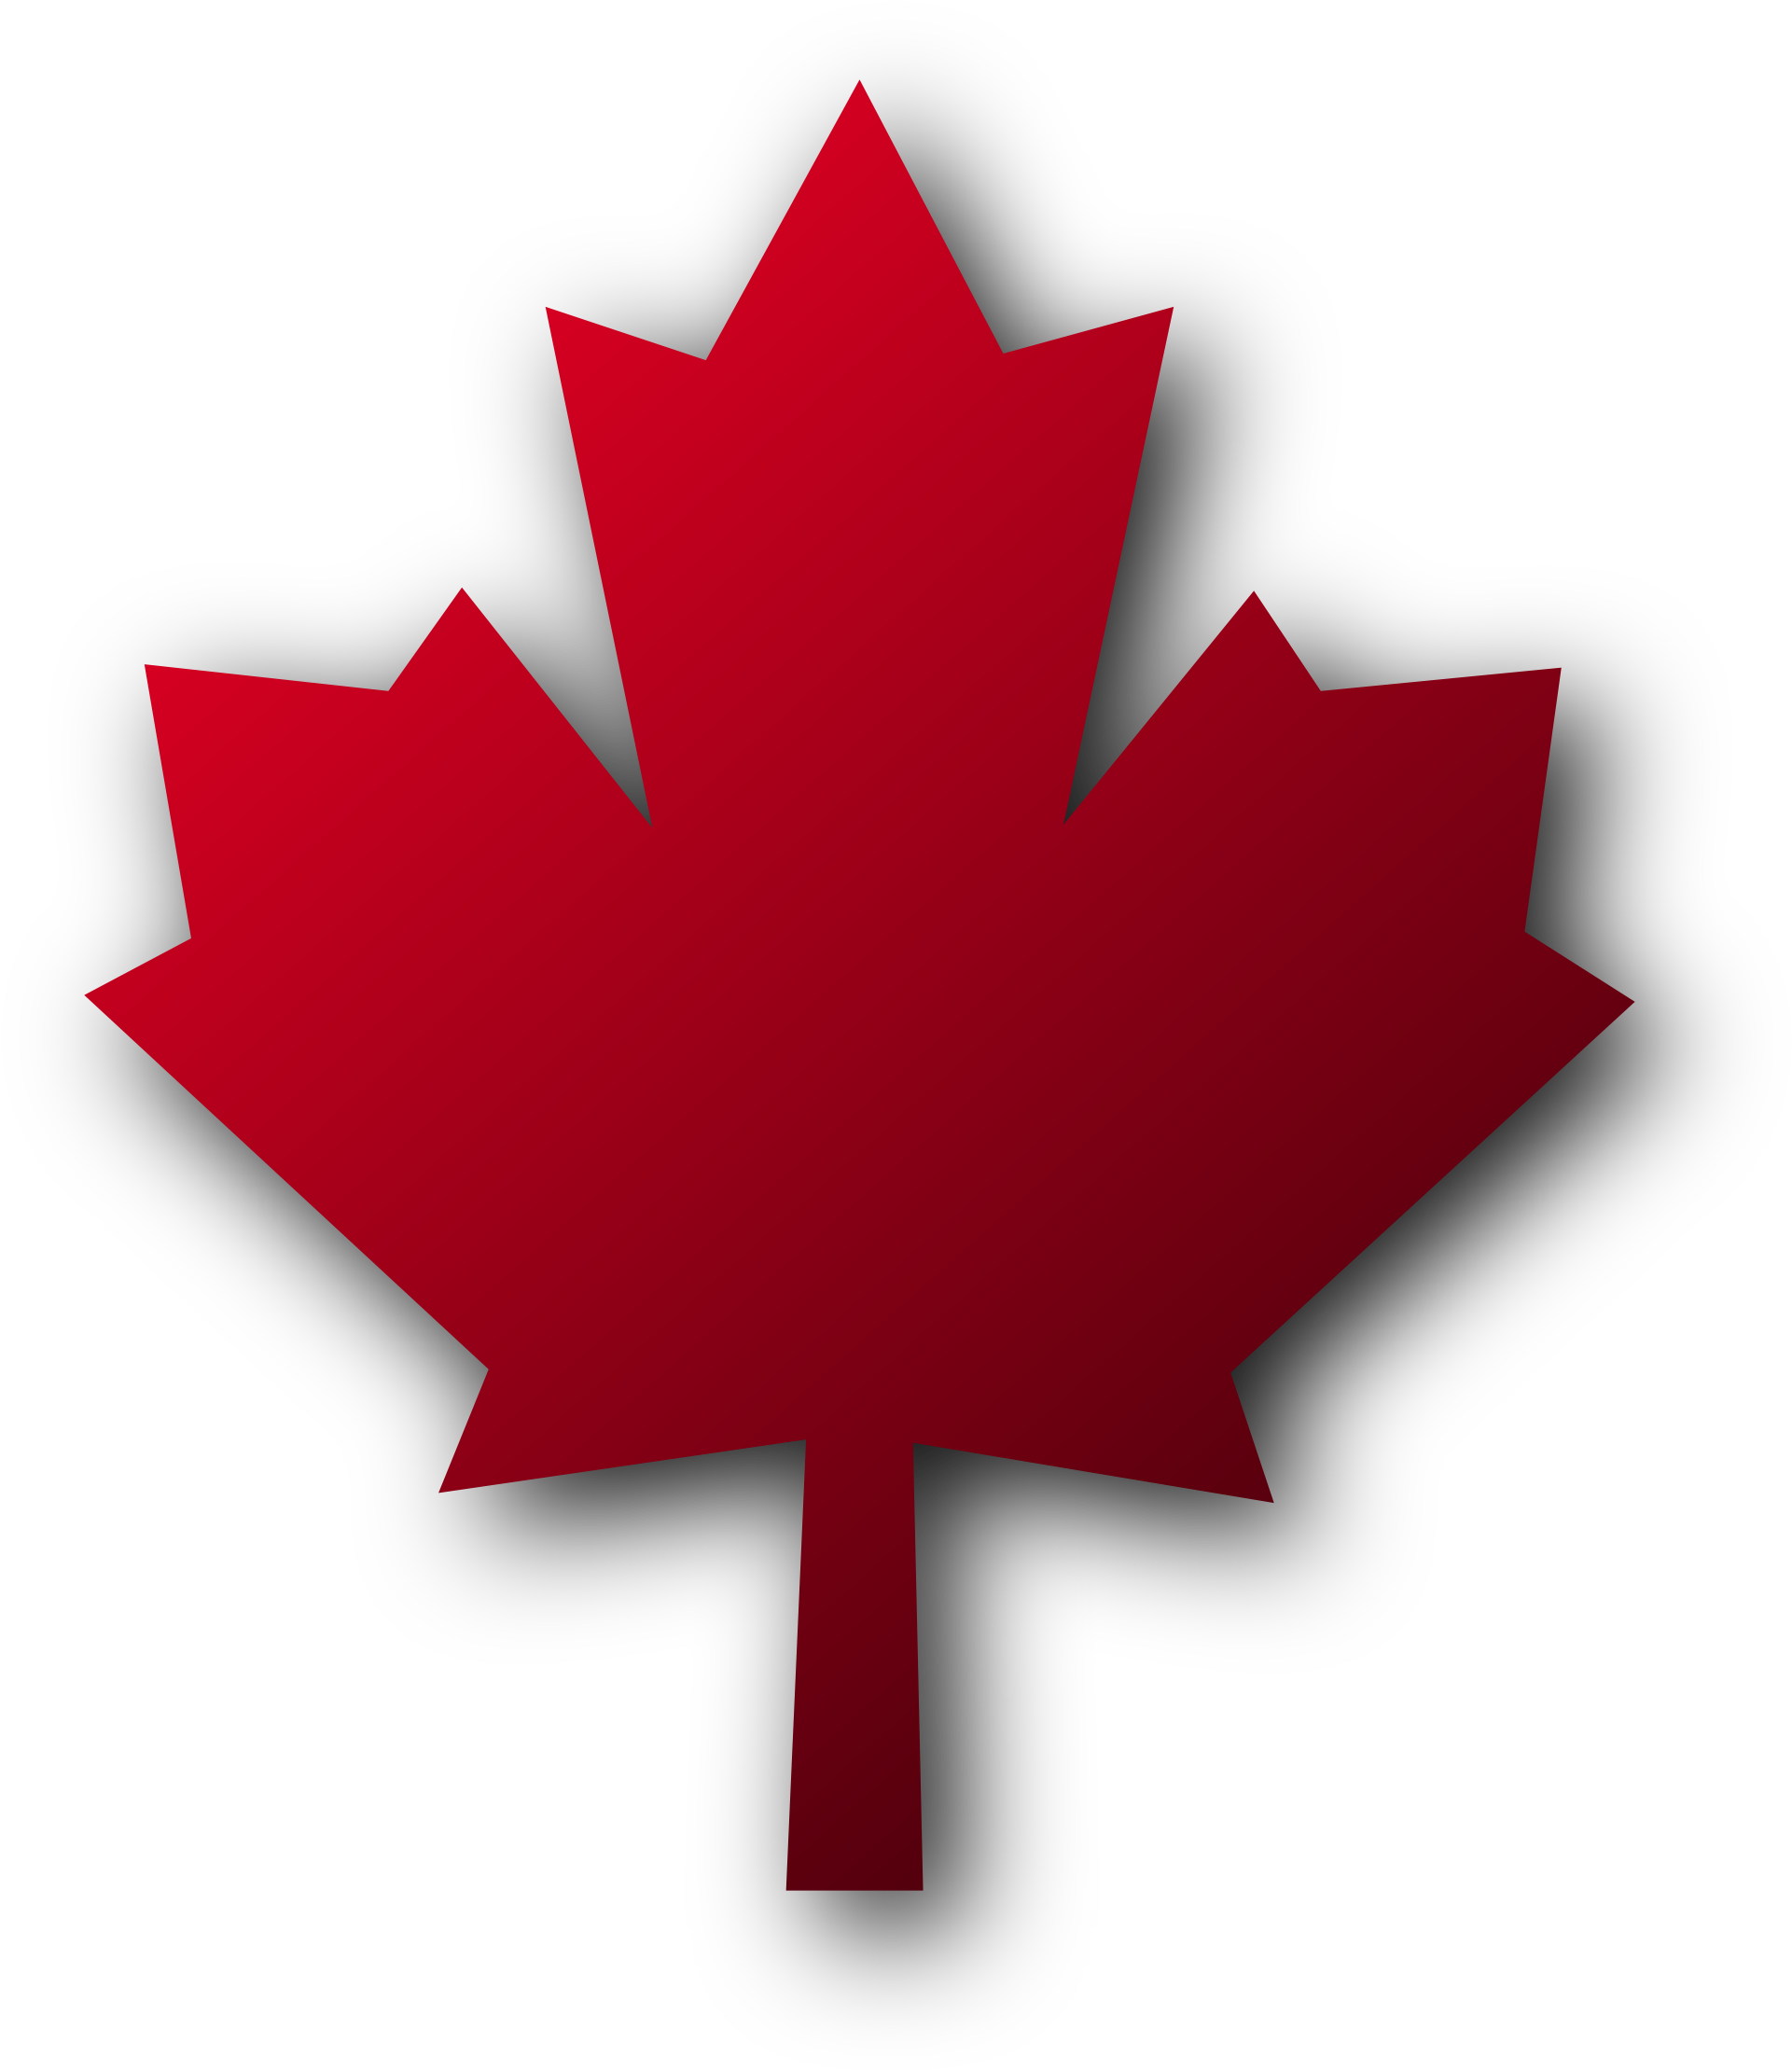 Maple Leaf Clipart Black And White - Toronto Pearson International Airport (1969x2248)